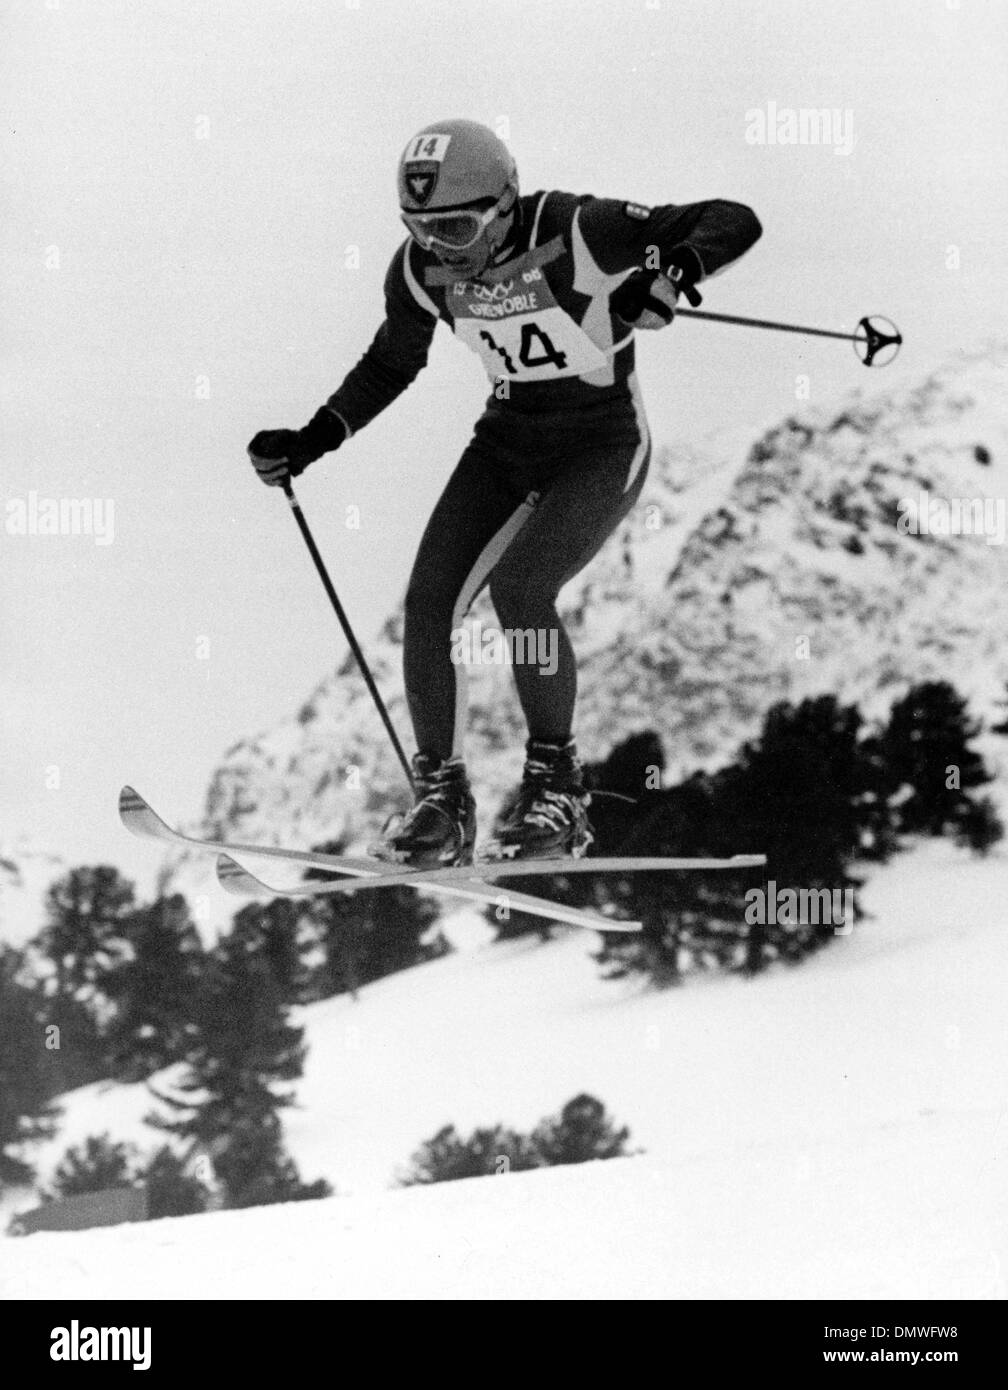 Feb 06, 1968; Grenoble, FRANCE; The French skier JEAN CLAUDE KILLY winning  the gold medal at winter olympics. (Credit Image: © KEYSTONE Pictures USA  Stock Photo - Alamy